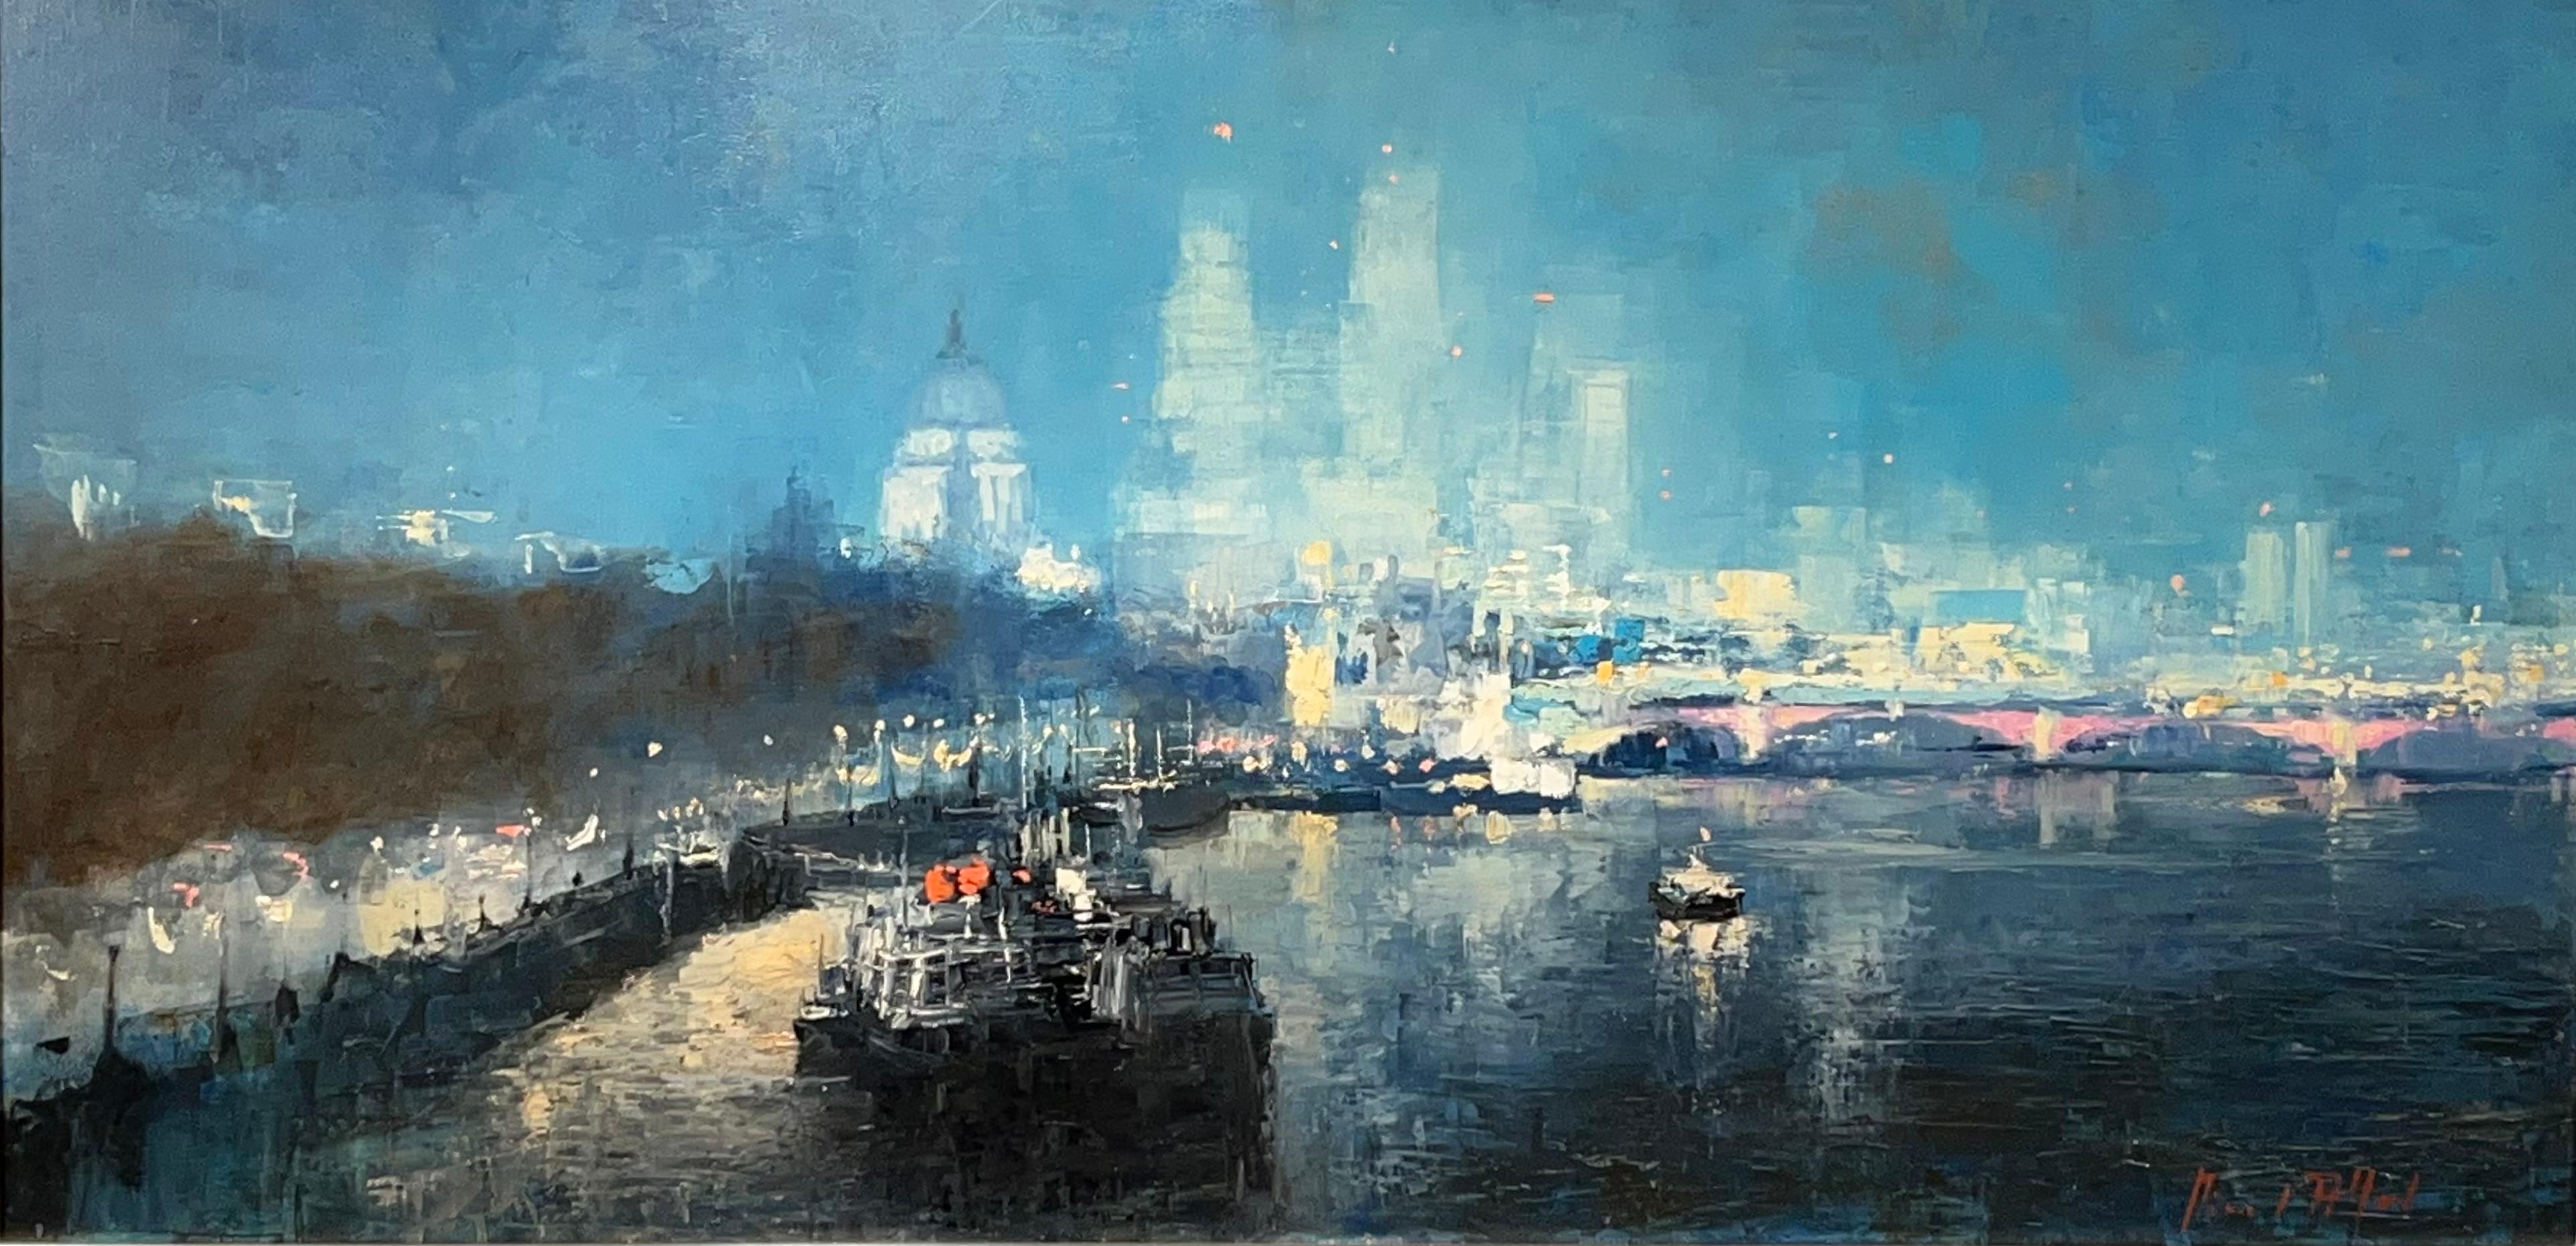 Nightfall, St Paul's-Original impressionism cityscape painting-contemporary Art - Painting by Michael Alford